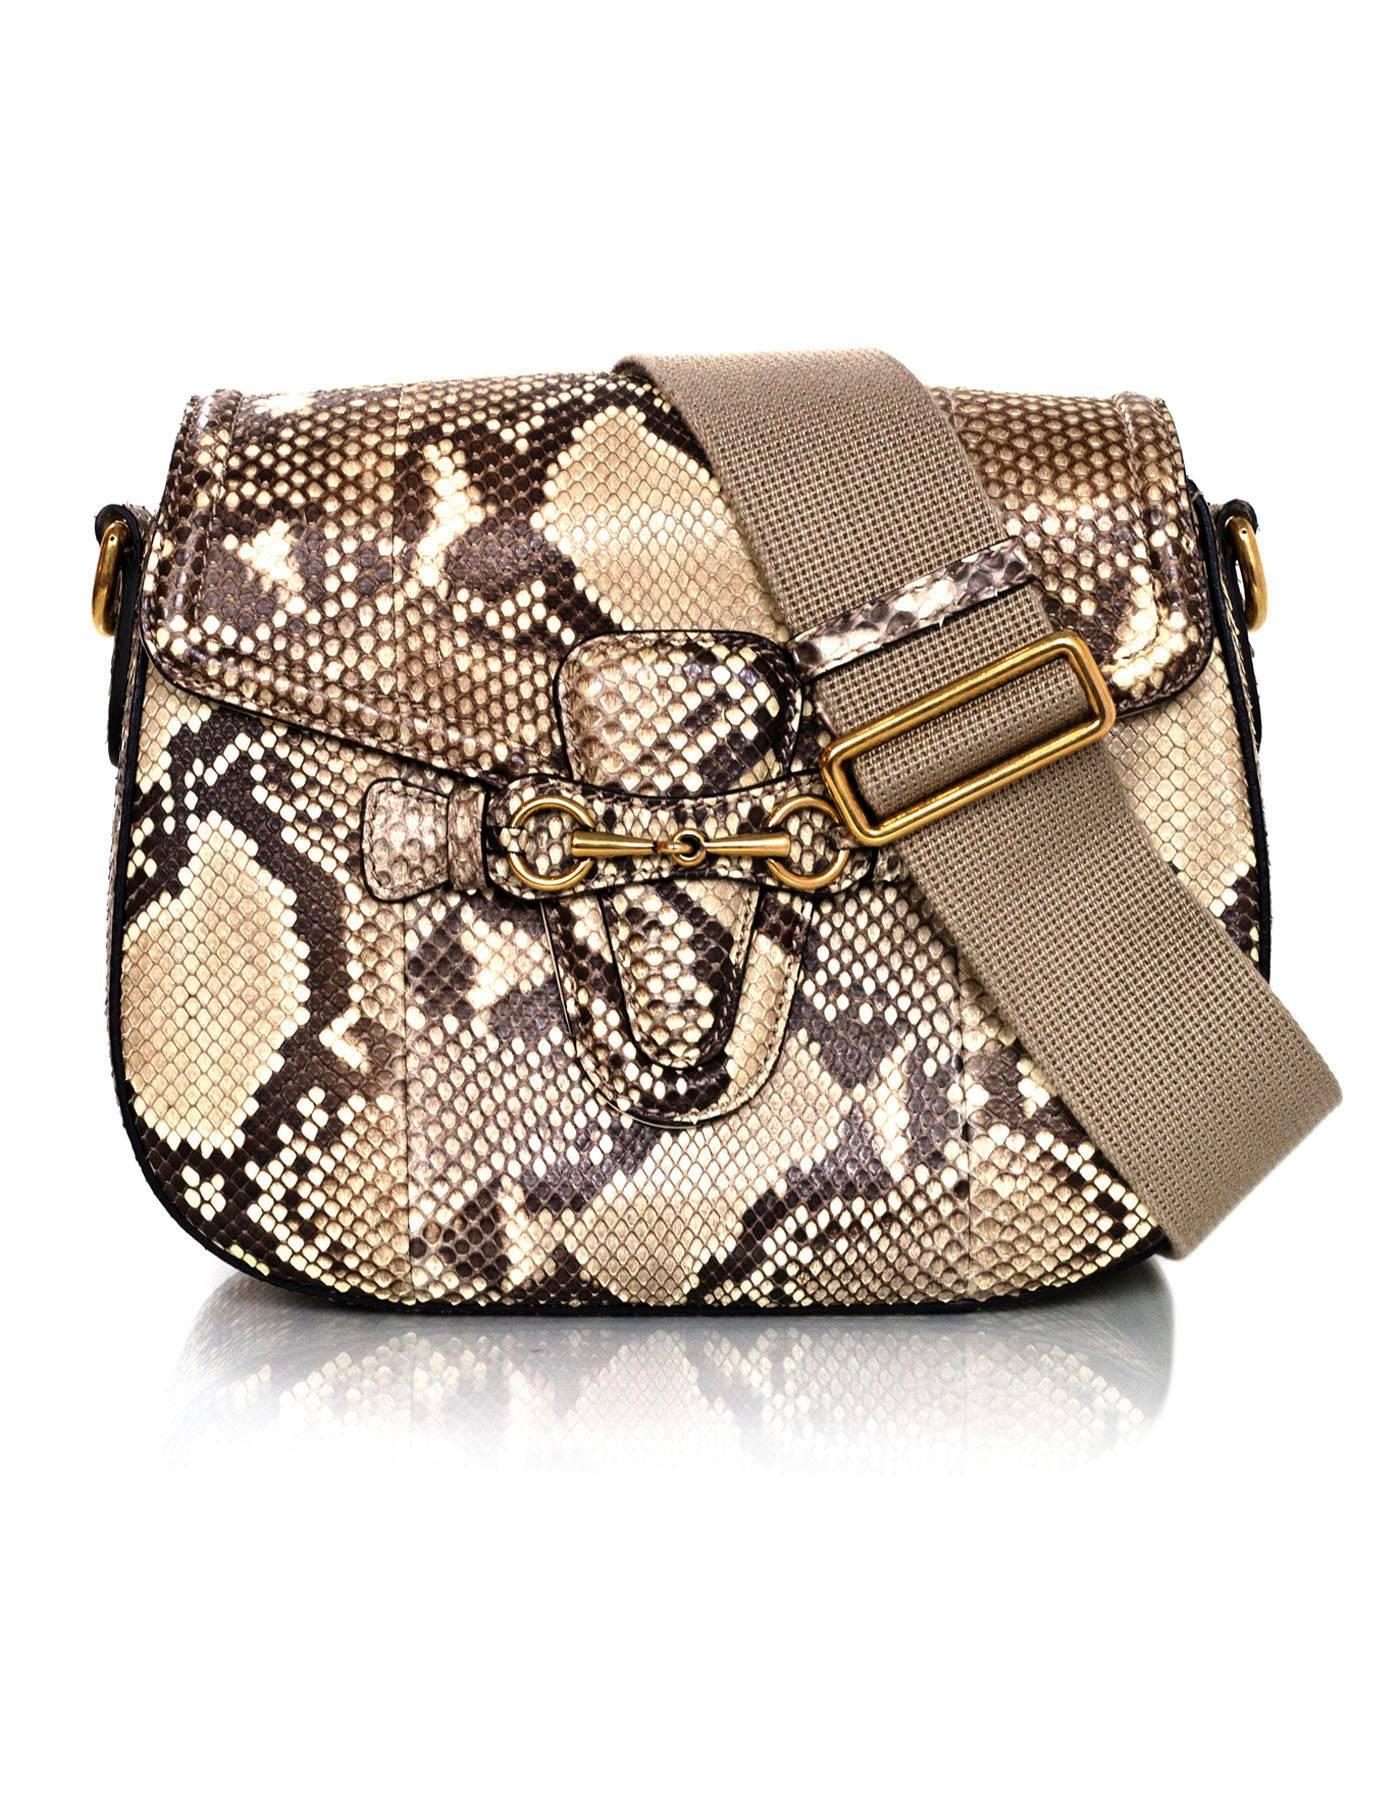 Gucci Python Lady Web Crossbody Bag
Features optional all python or canvas straps

Made In: Italy
Color: Cream and taupe
Hardware: Goldtone
Materials: Python and metal
Lining: Cream leather
Closure/Opening: Flap top with push-tab closure
Exterior